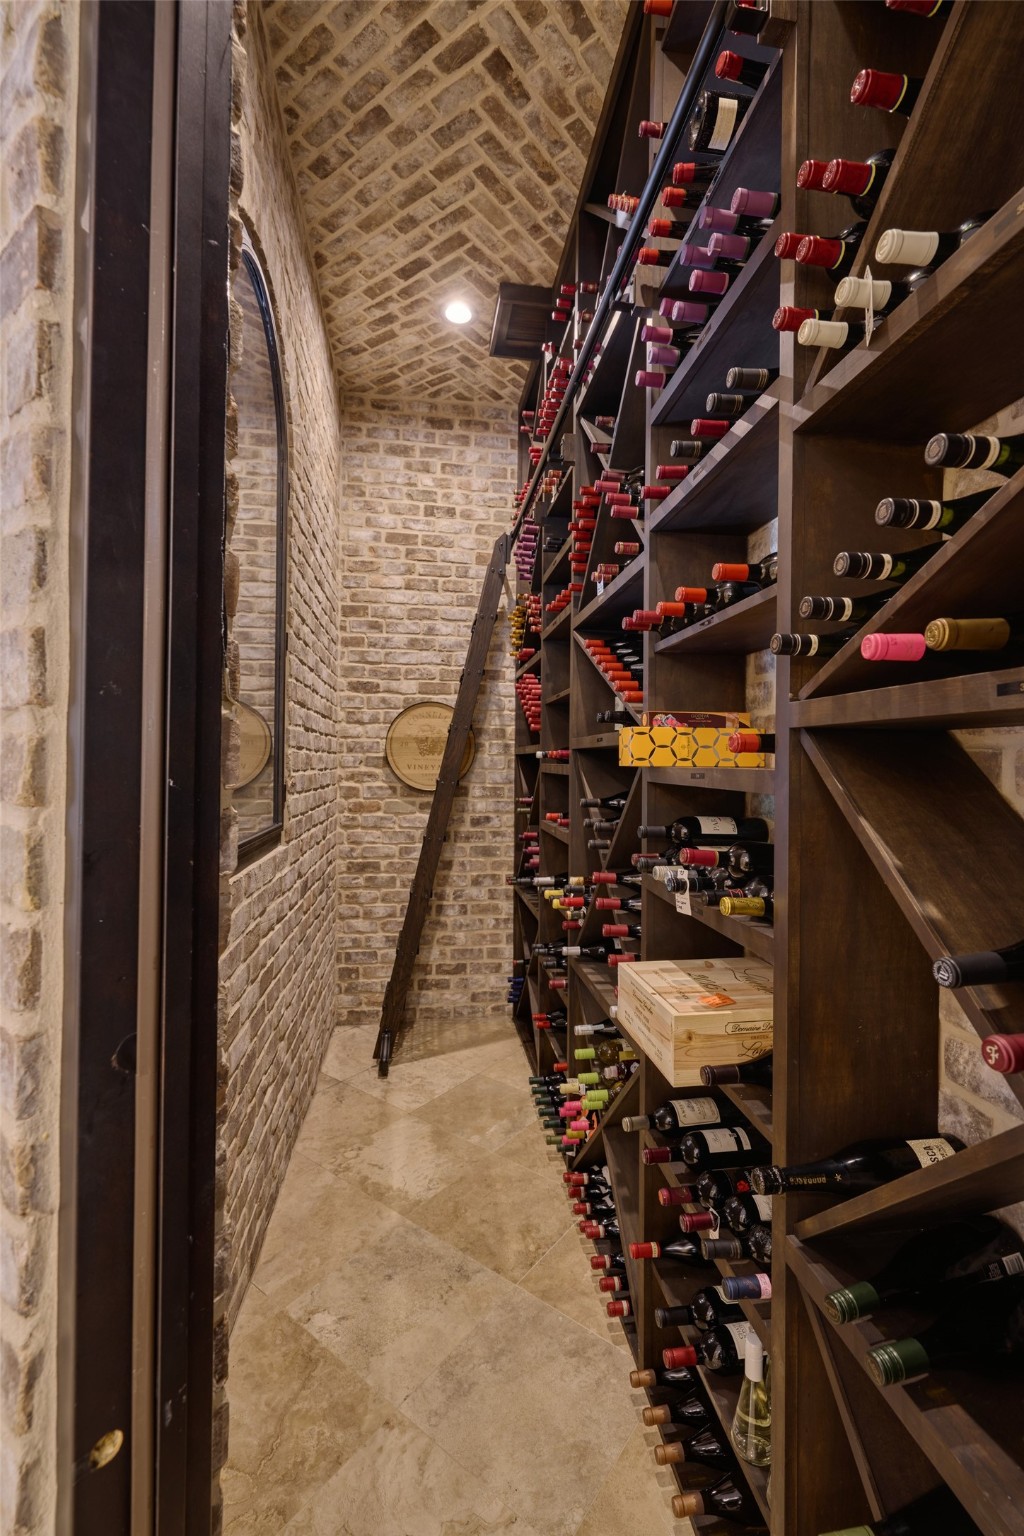 Over 100 cases of wine can fit in this true wine cellar, temperature-controlled at 57 degrees, a ladder for the higher shelves, travertine marble flooring, and brick walls.  A wine lovers dream come true.  Wine is not included in the sale of this home.